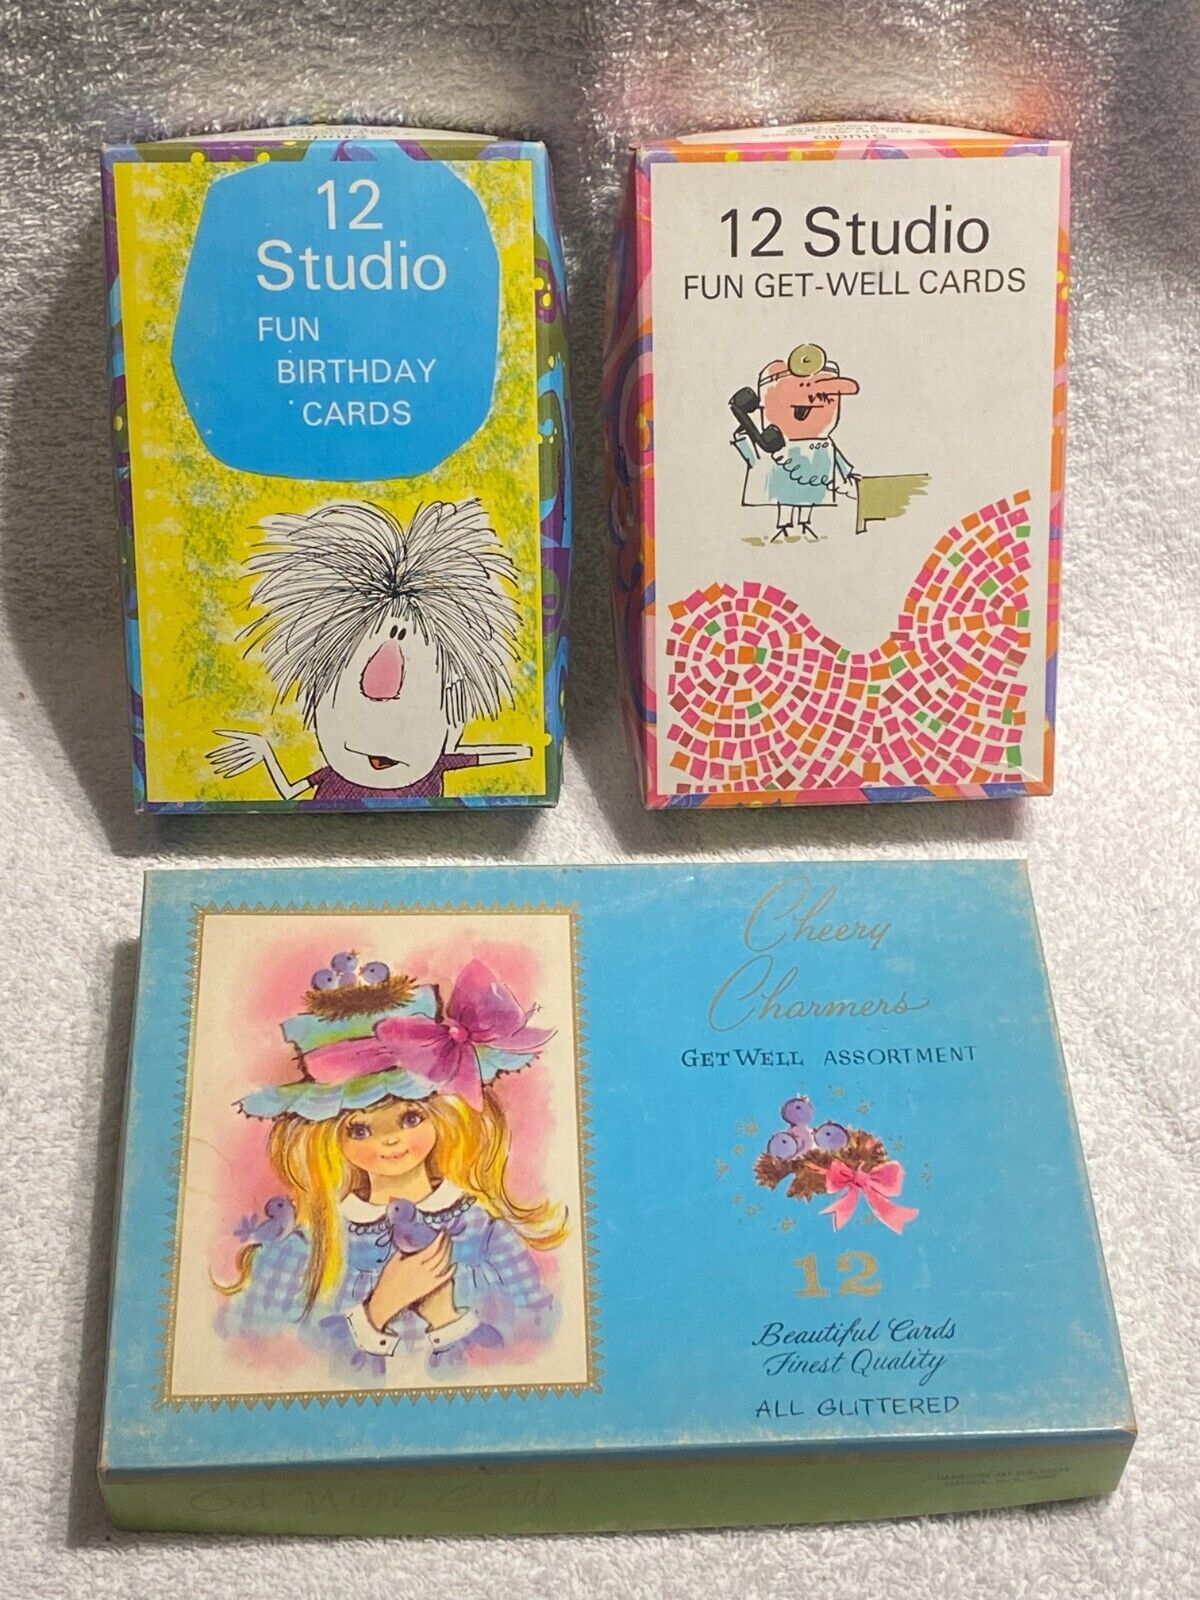 Vintage Lot Unused Greeting Cards - 2 STUDIO boxes, Get Well & Birthday cards